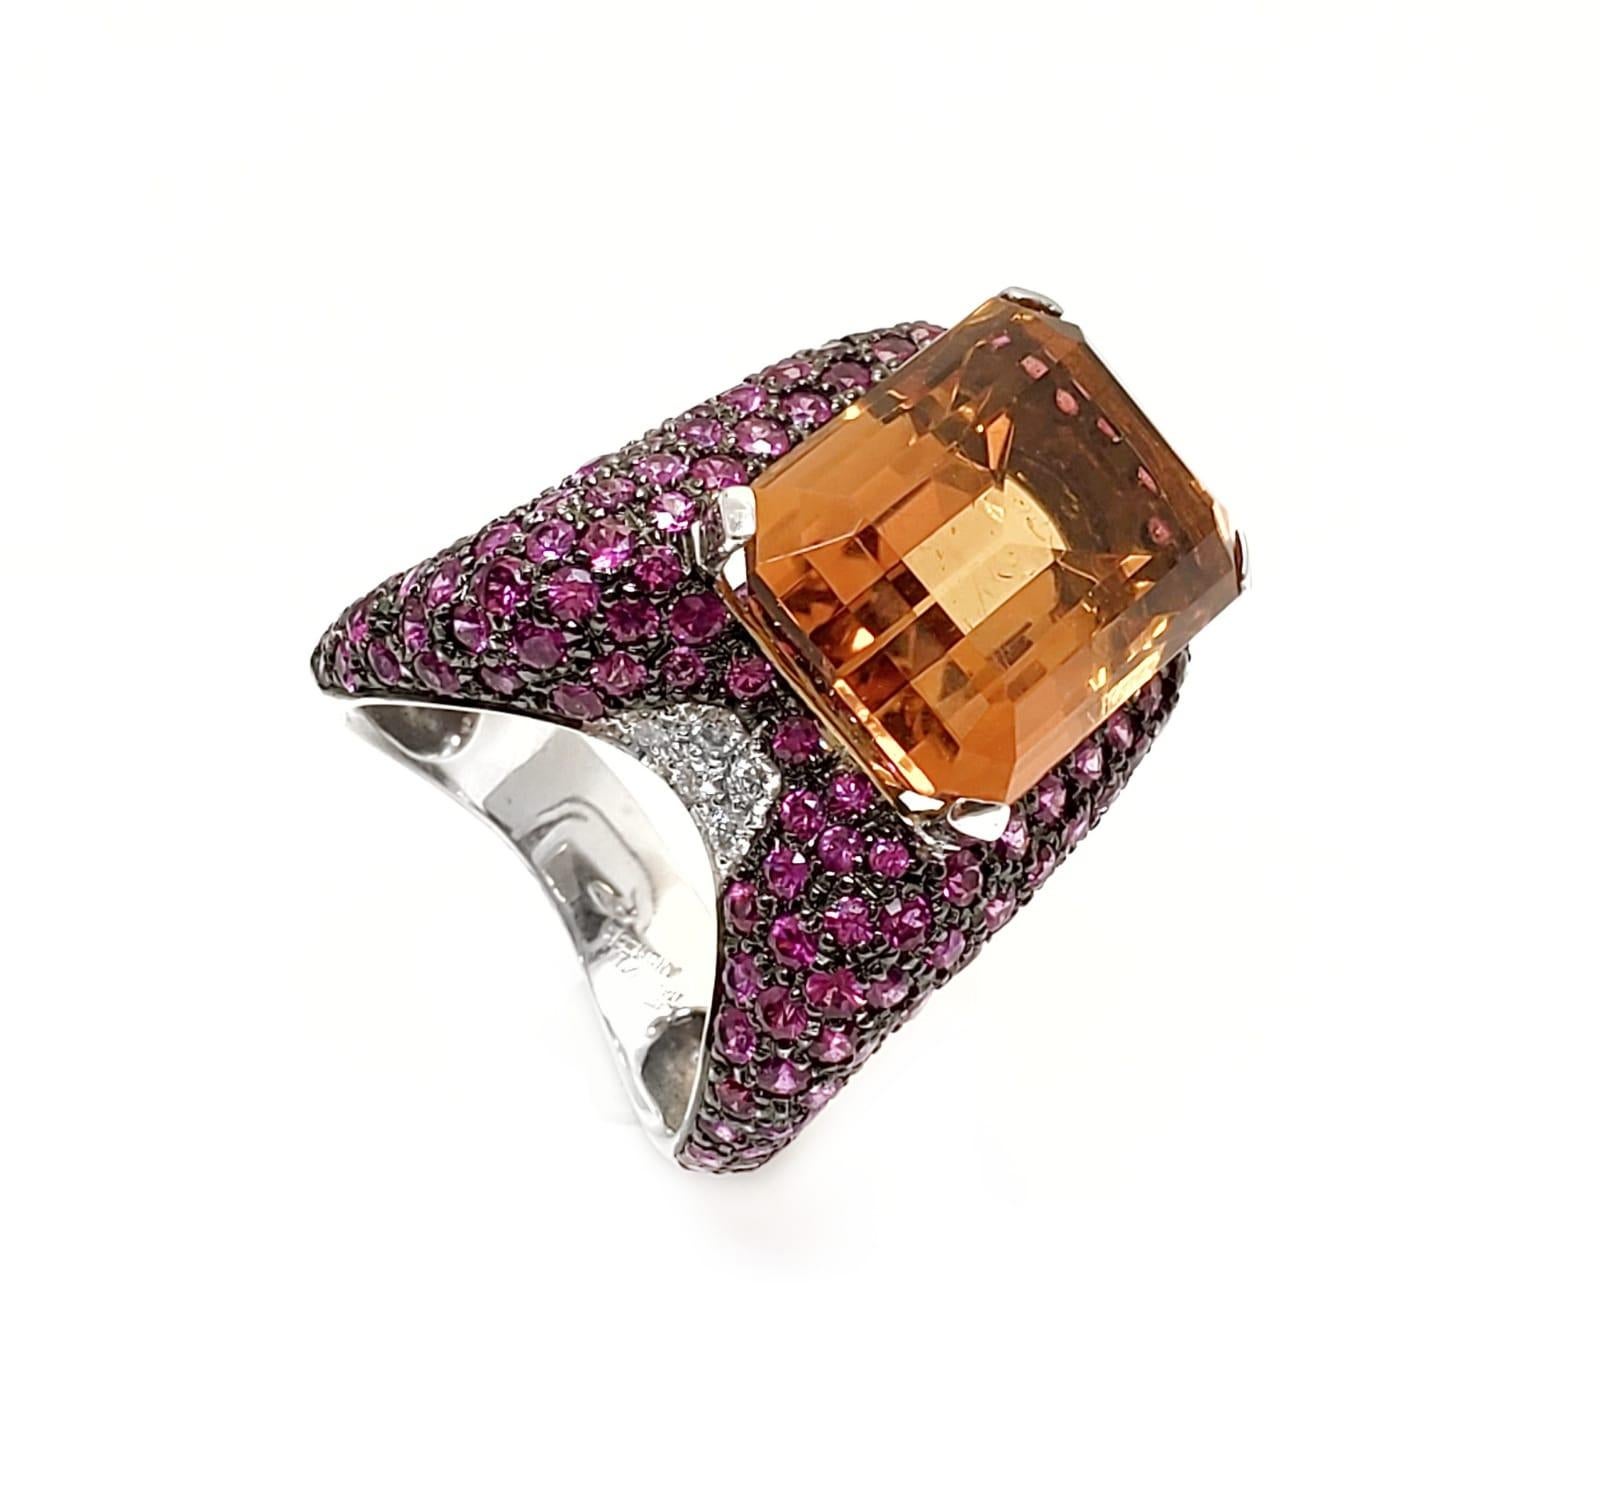 Contemporary Andreoli Pink Sapphire Diamond Emerald Cut Citrine Cocktail Ring 18 Karat Gold For Sale